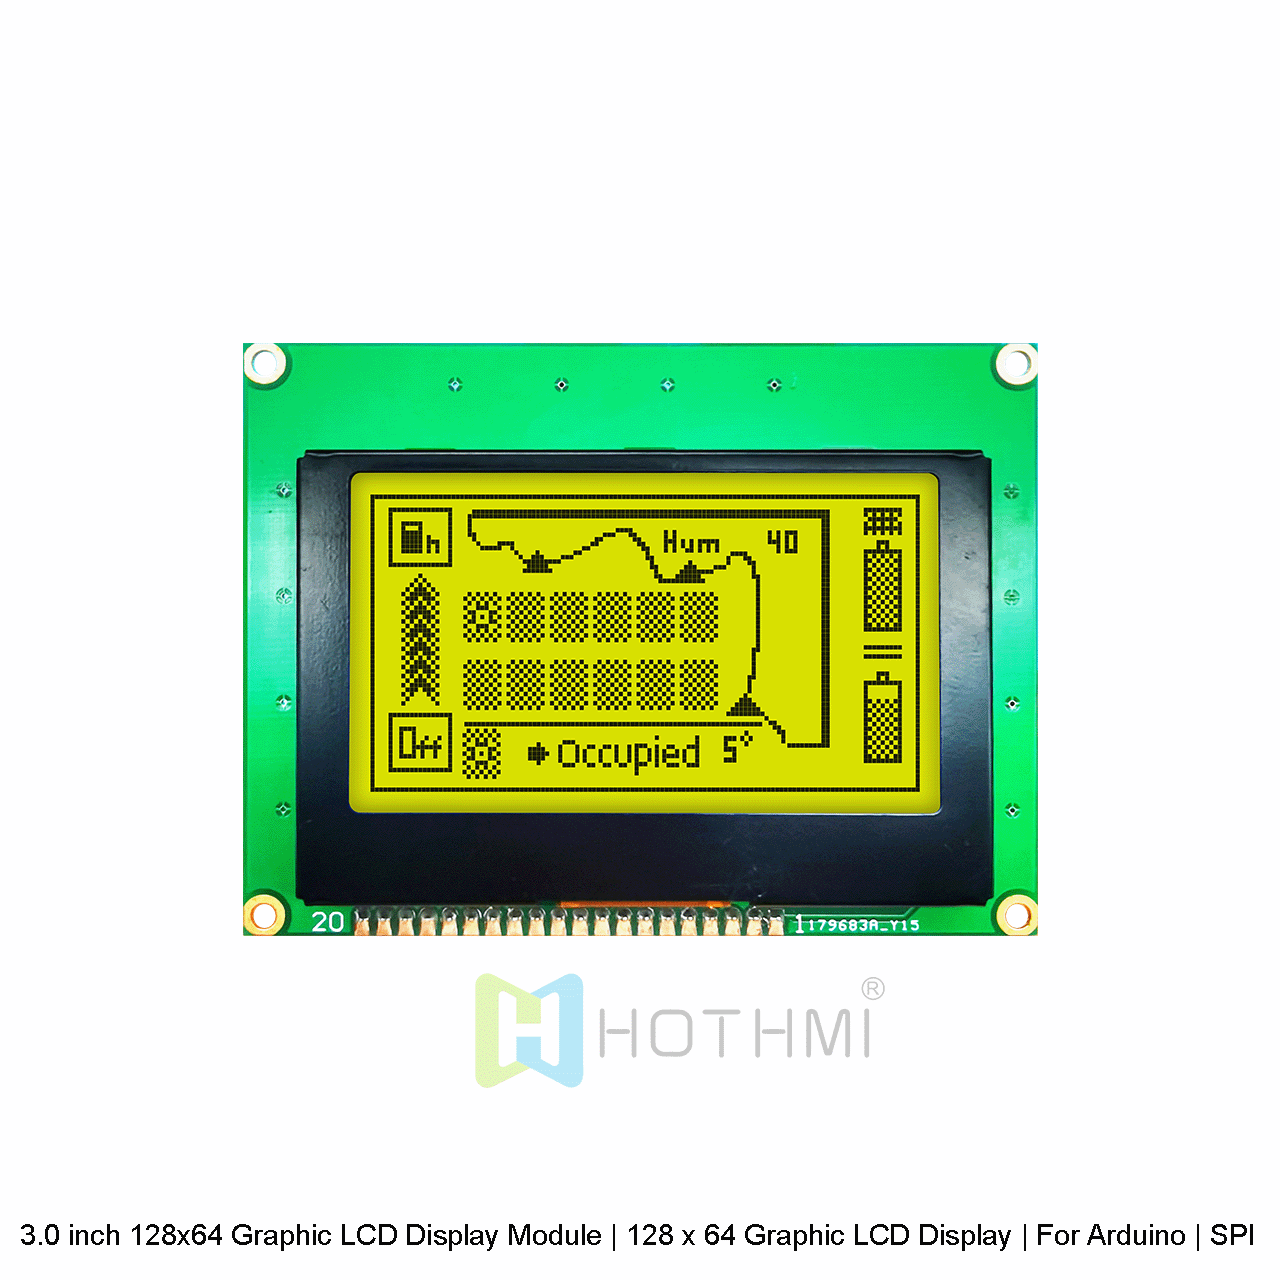 3.0 inch 128x64 Graphic LCD Display Module | 128 x 64 Graphic LCD Display | For Arduino | SPI Interface